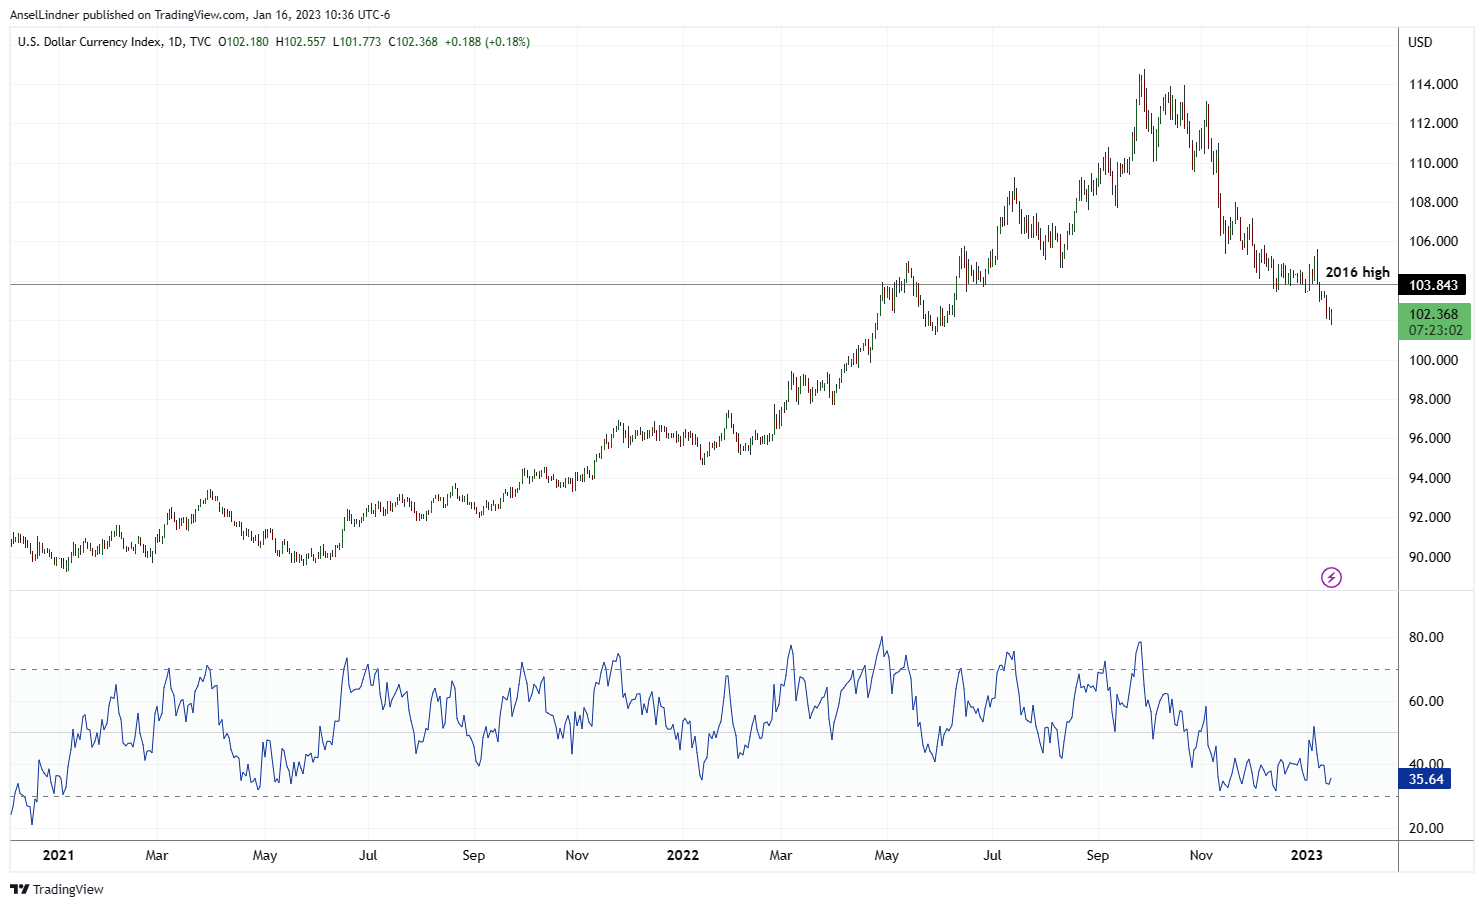 Daily dollar DXY chart with RSI